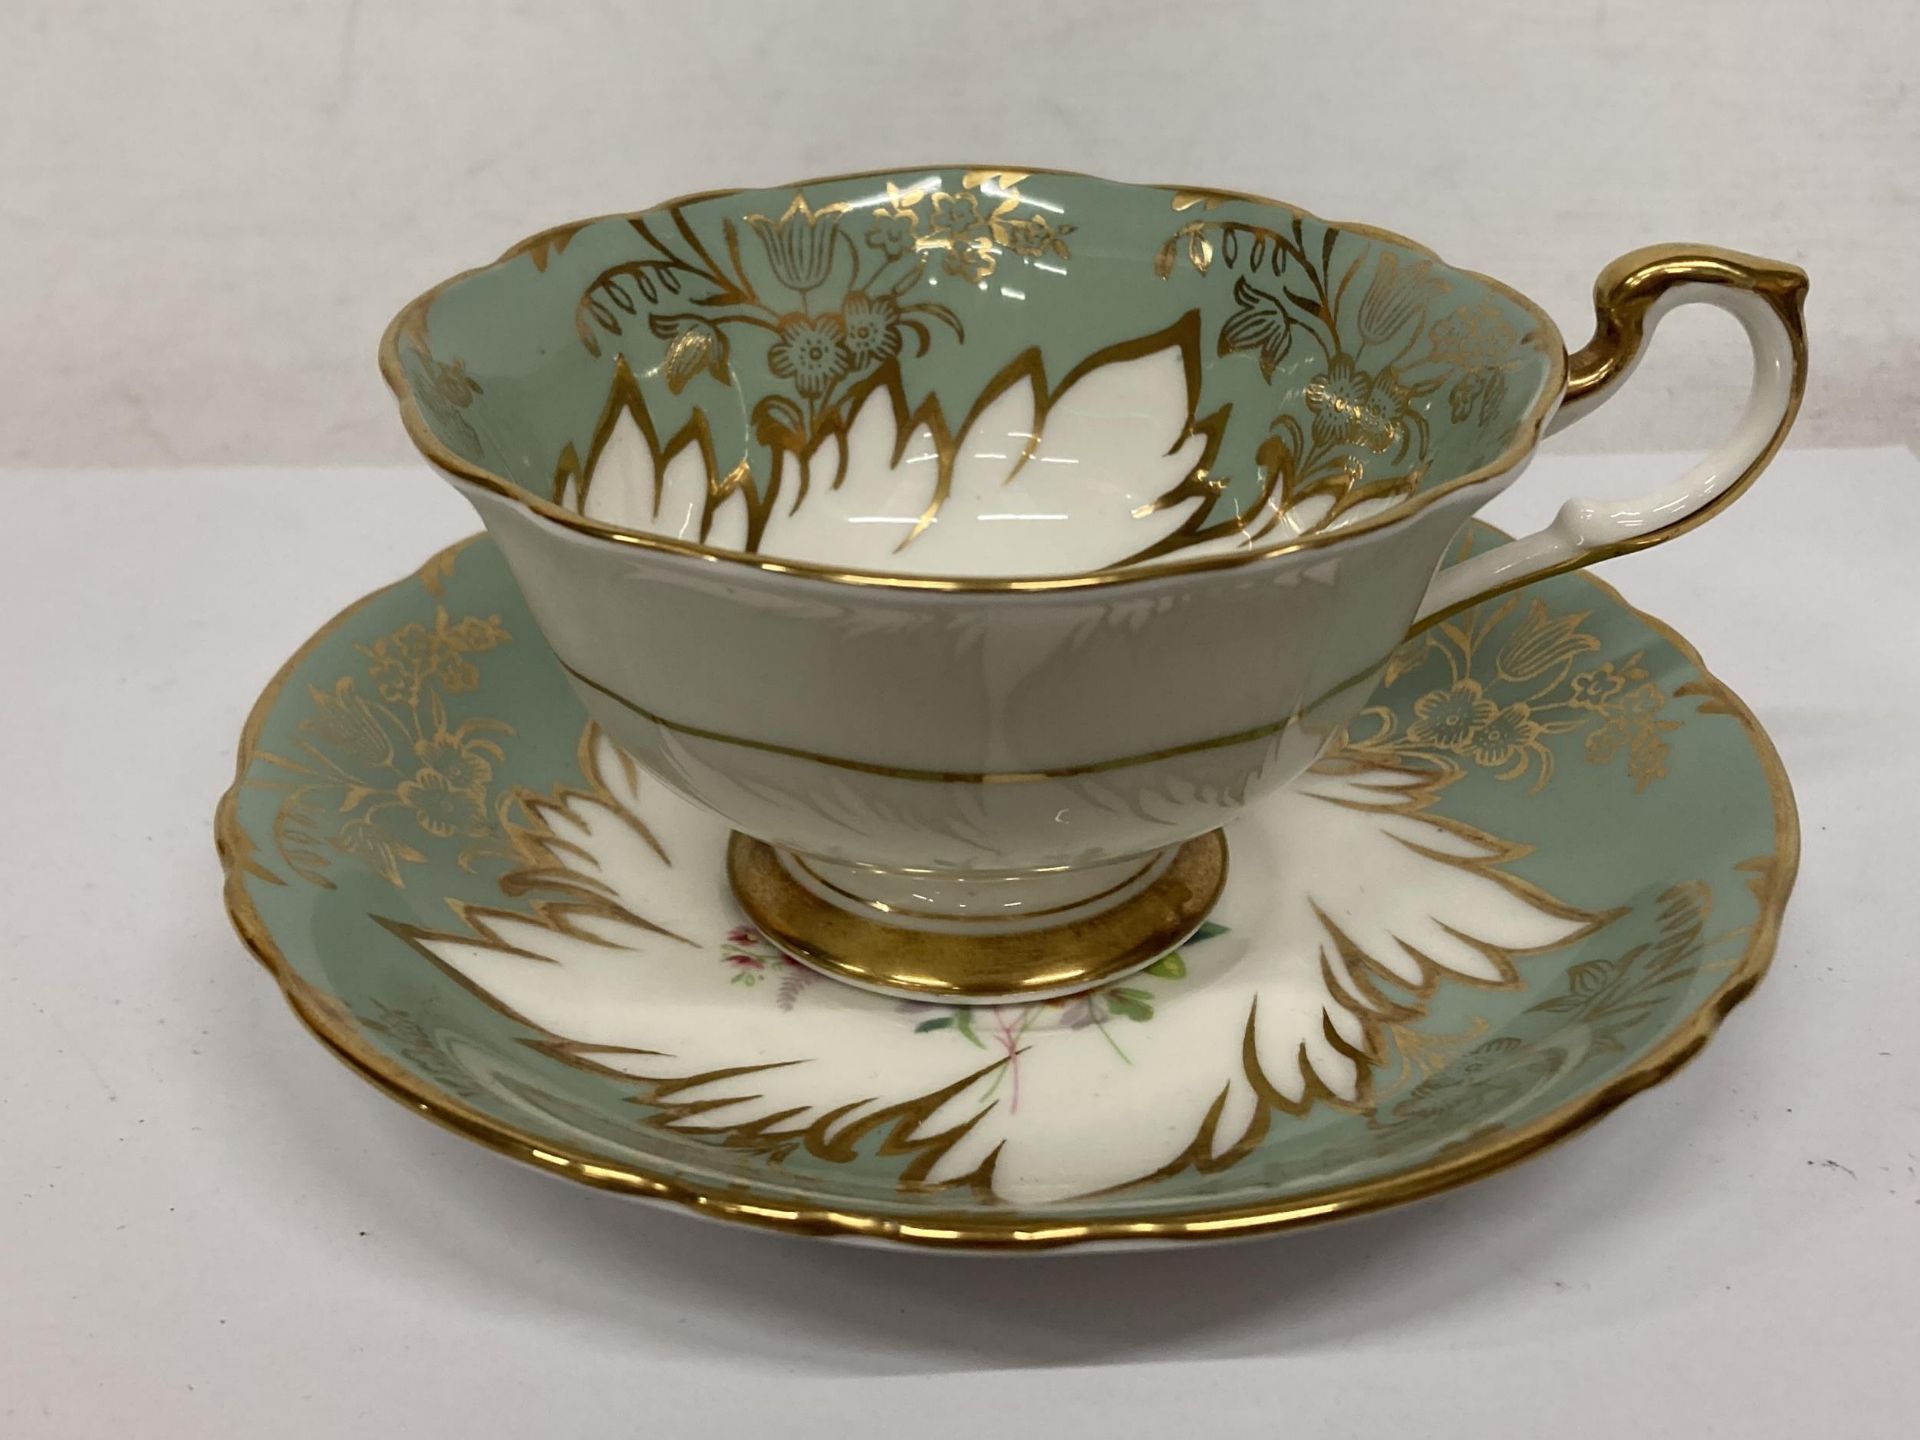 A PARAGON FOOTED TEACUP AND SAUCER GREEN WITH GOLD GILT AND FLORAL SPRAYS - Image 2 of 4